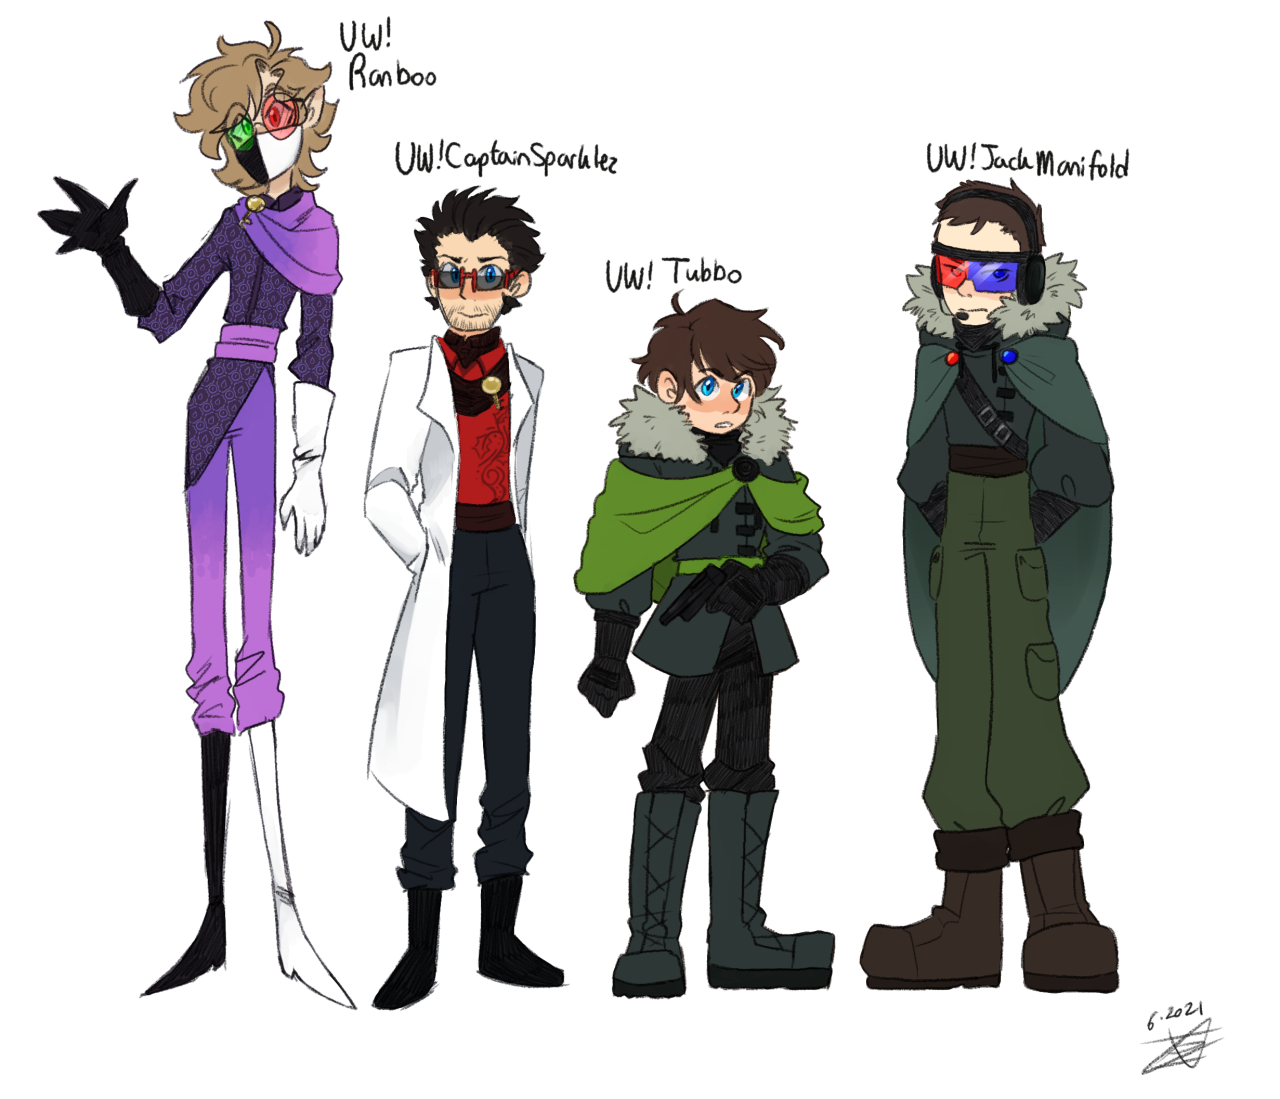 This is a drawing of the characters from Voltz Wars, Ranboo, Captain Sparklez, Tubbo, and Jack Manifold. Ranboo and Captain Sparklez are wearing futuristic scientific wear while Tubbo and Jack are wearing pilot suits and furs, reminiscent of old military uniforms.